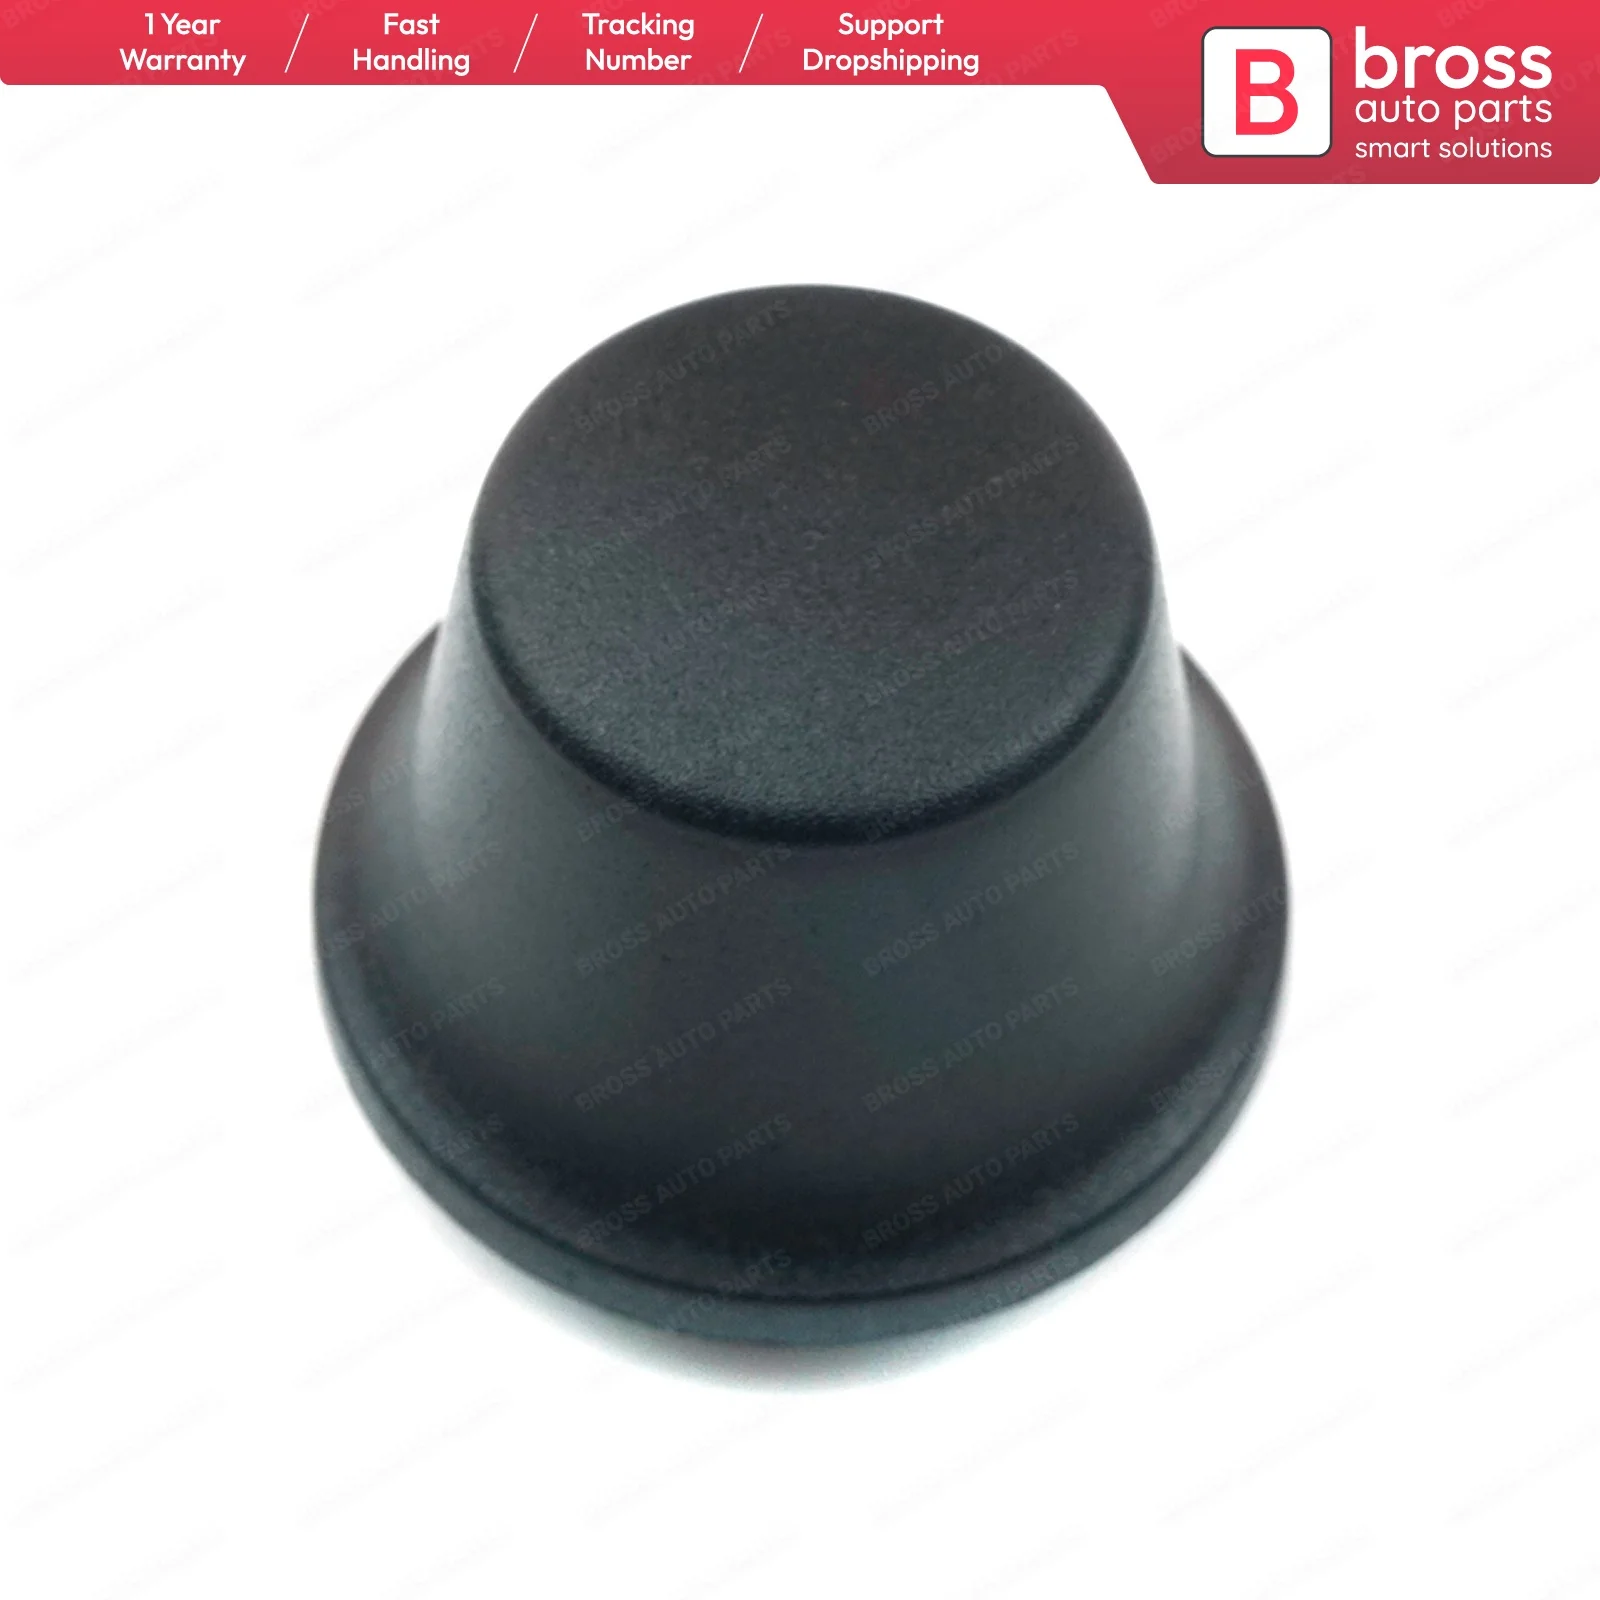 Bross Auto Parts BDP607 Business CD Player Radio Power Volume Knob Button 65126924906 for BMW E46 3 Series 1998-2005